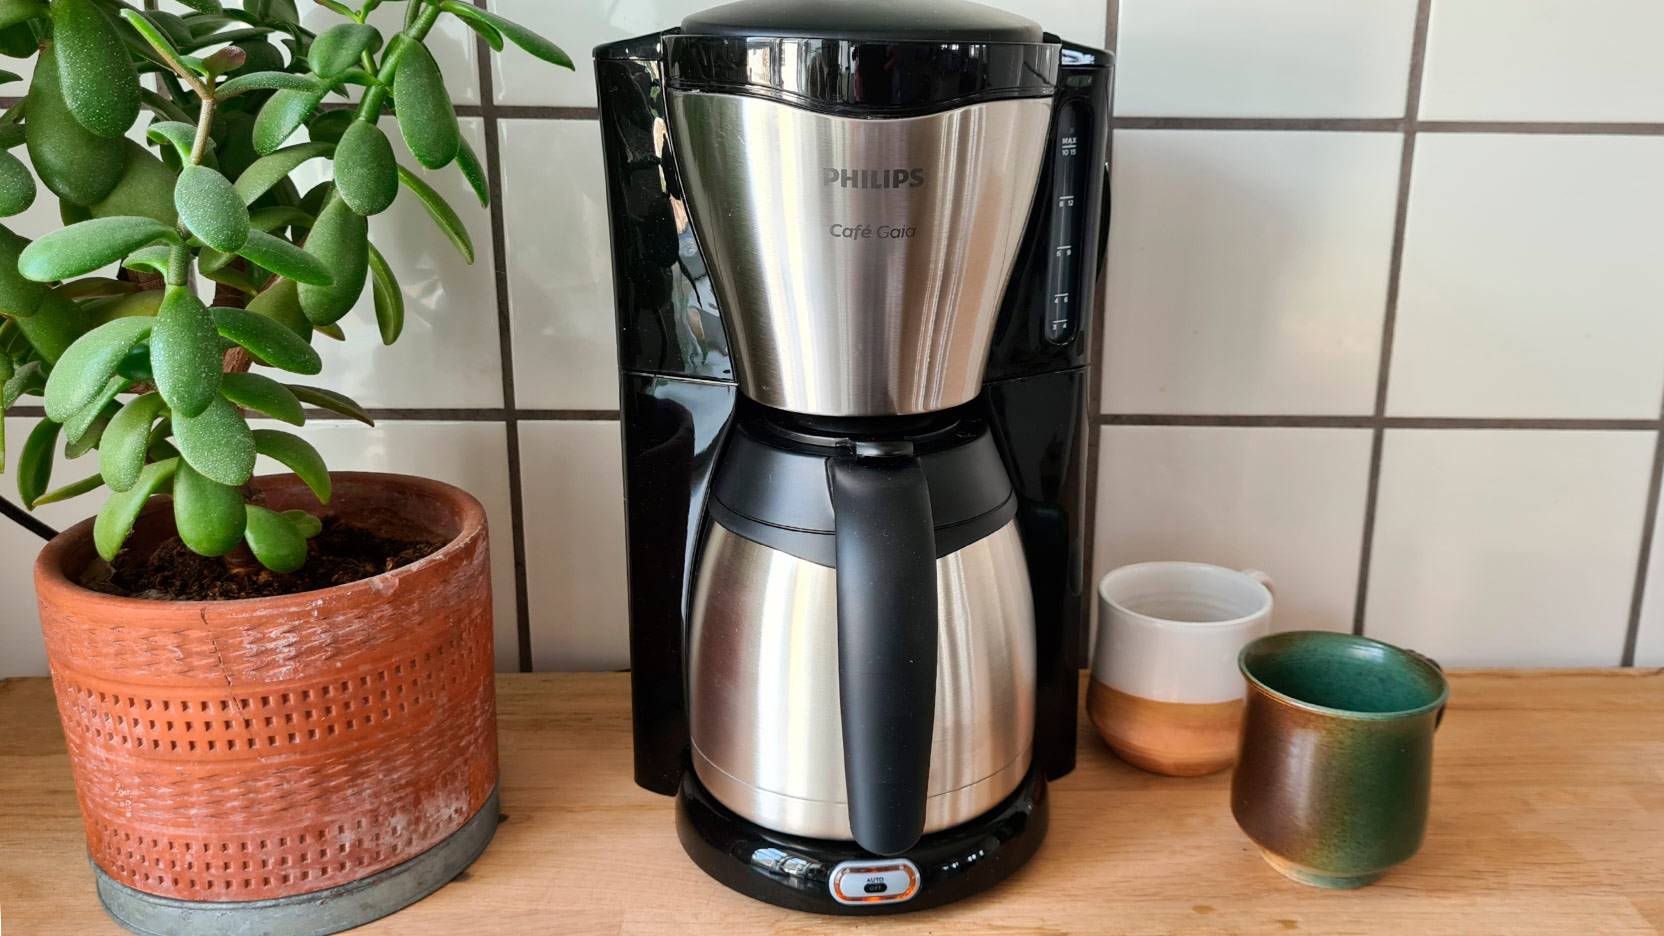 Image of Philips HD7456 Café Gaia brewing a jug of coffee